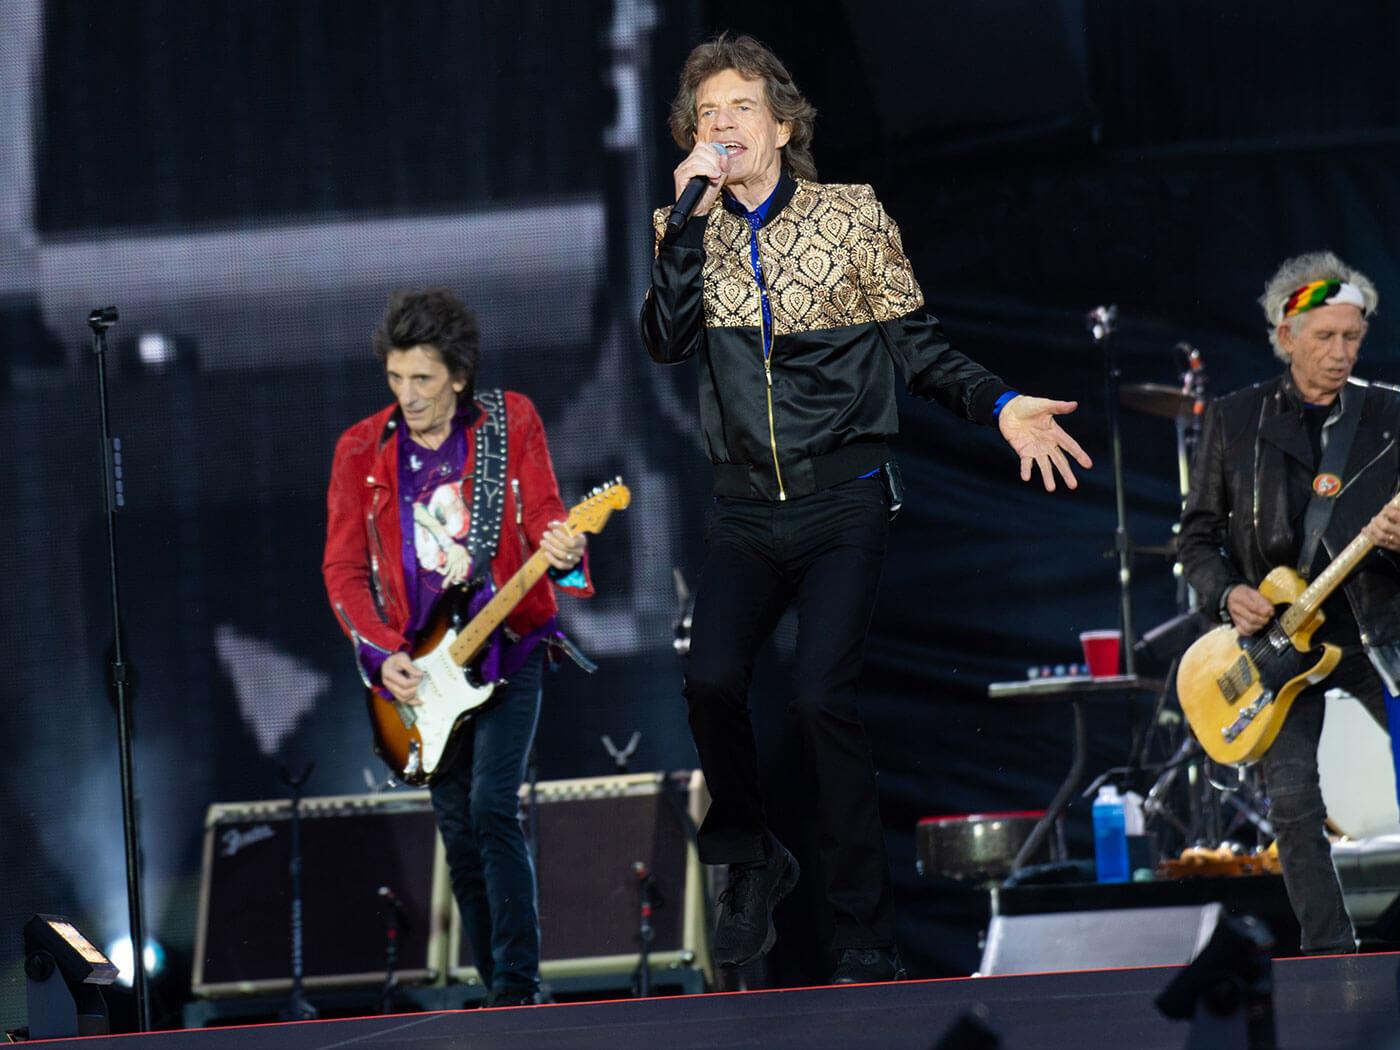 The Rolling Stones announce a 2020 North American tour